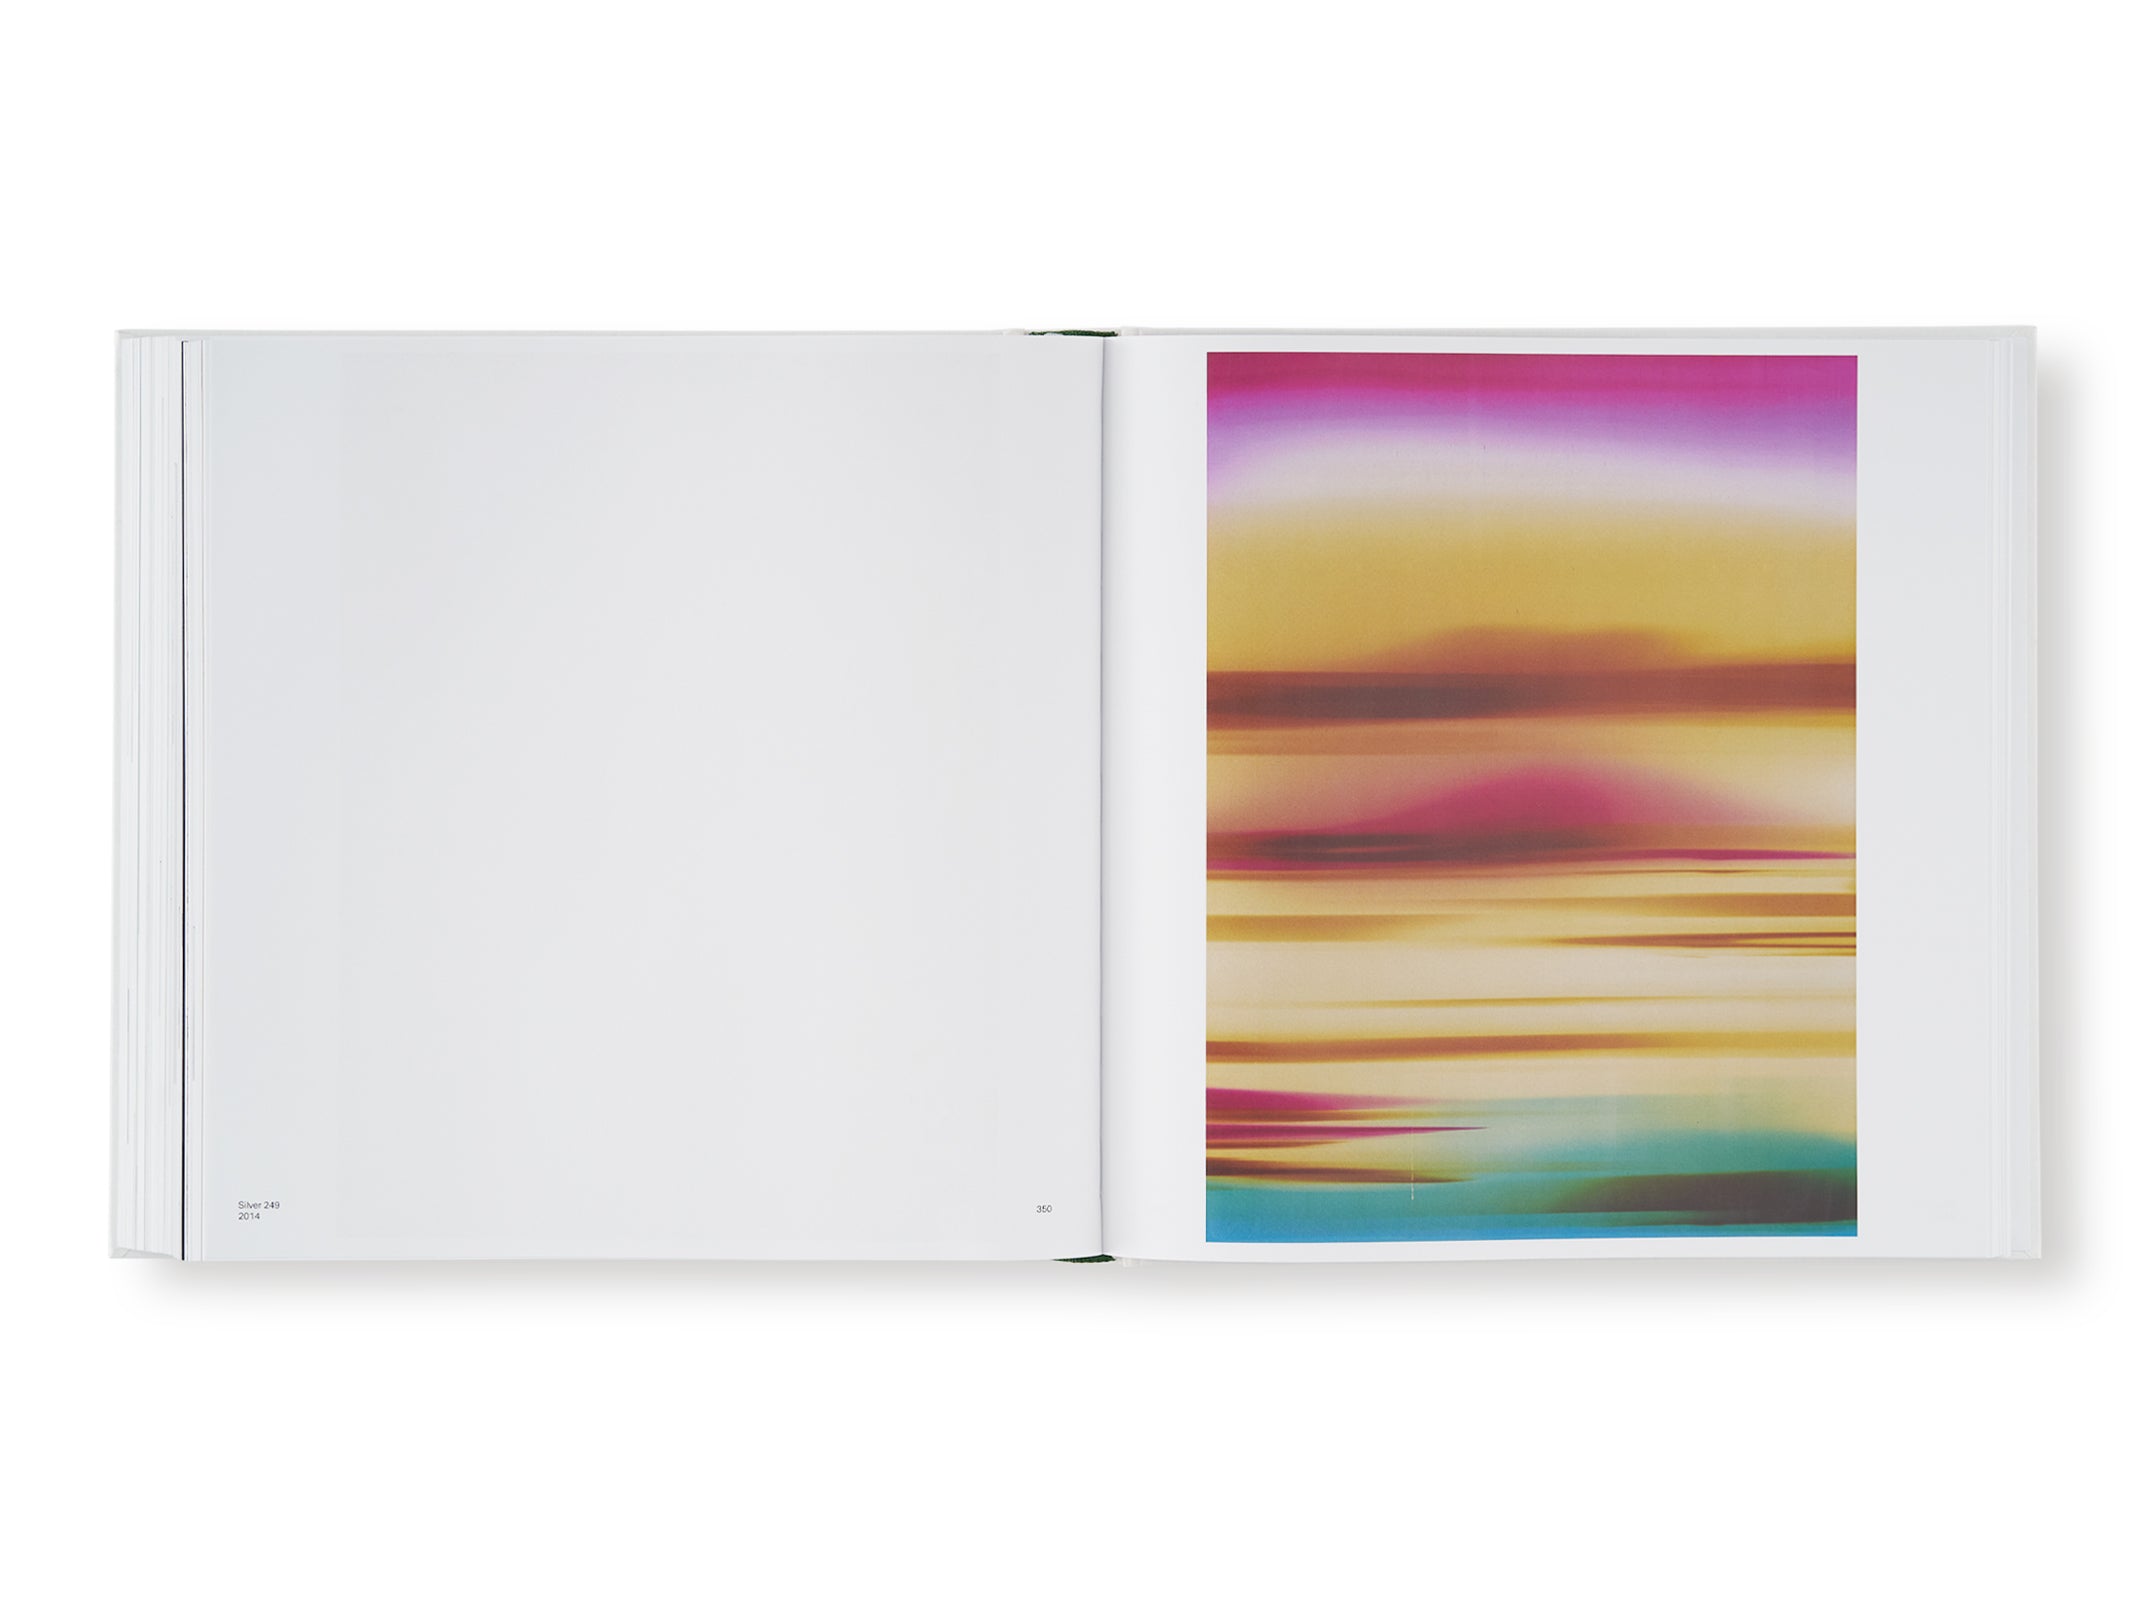 SATURATED LIGHT by Wolfgang Tillmans